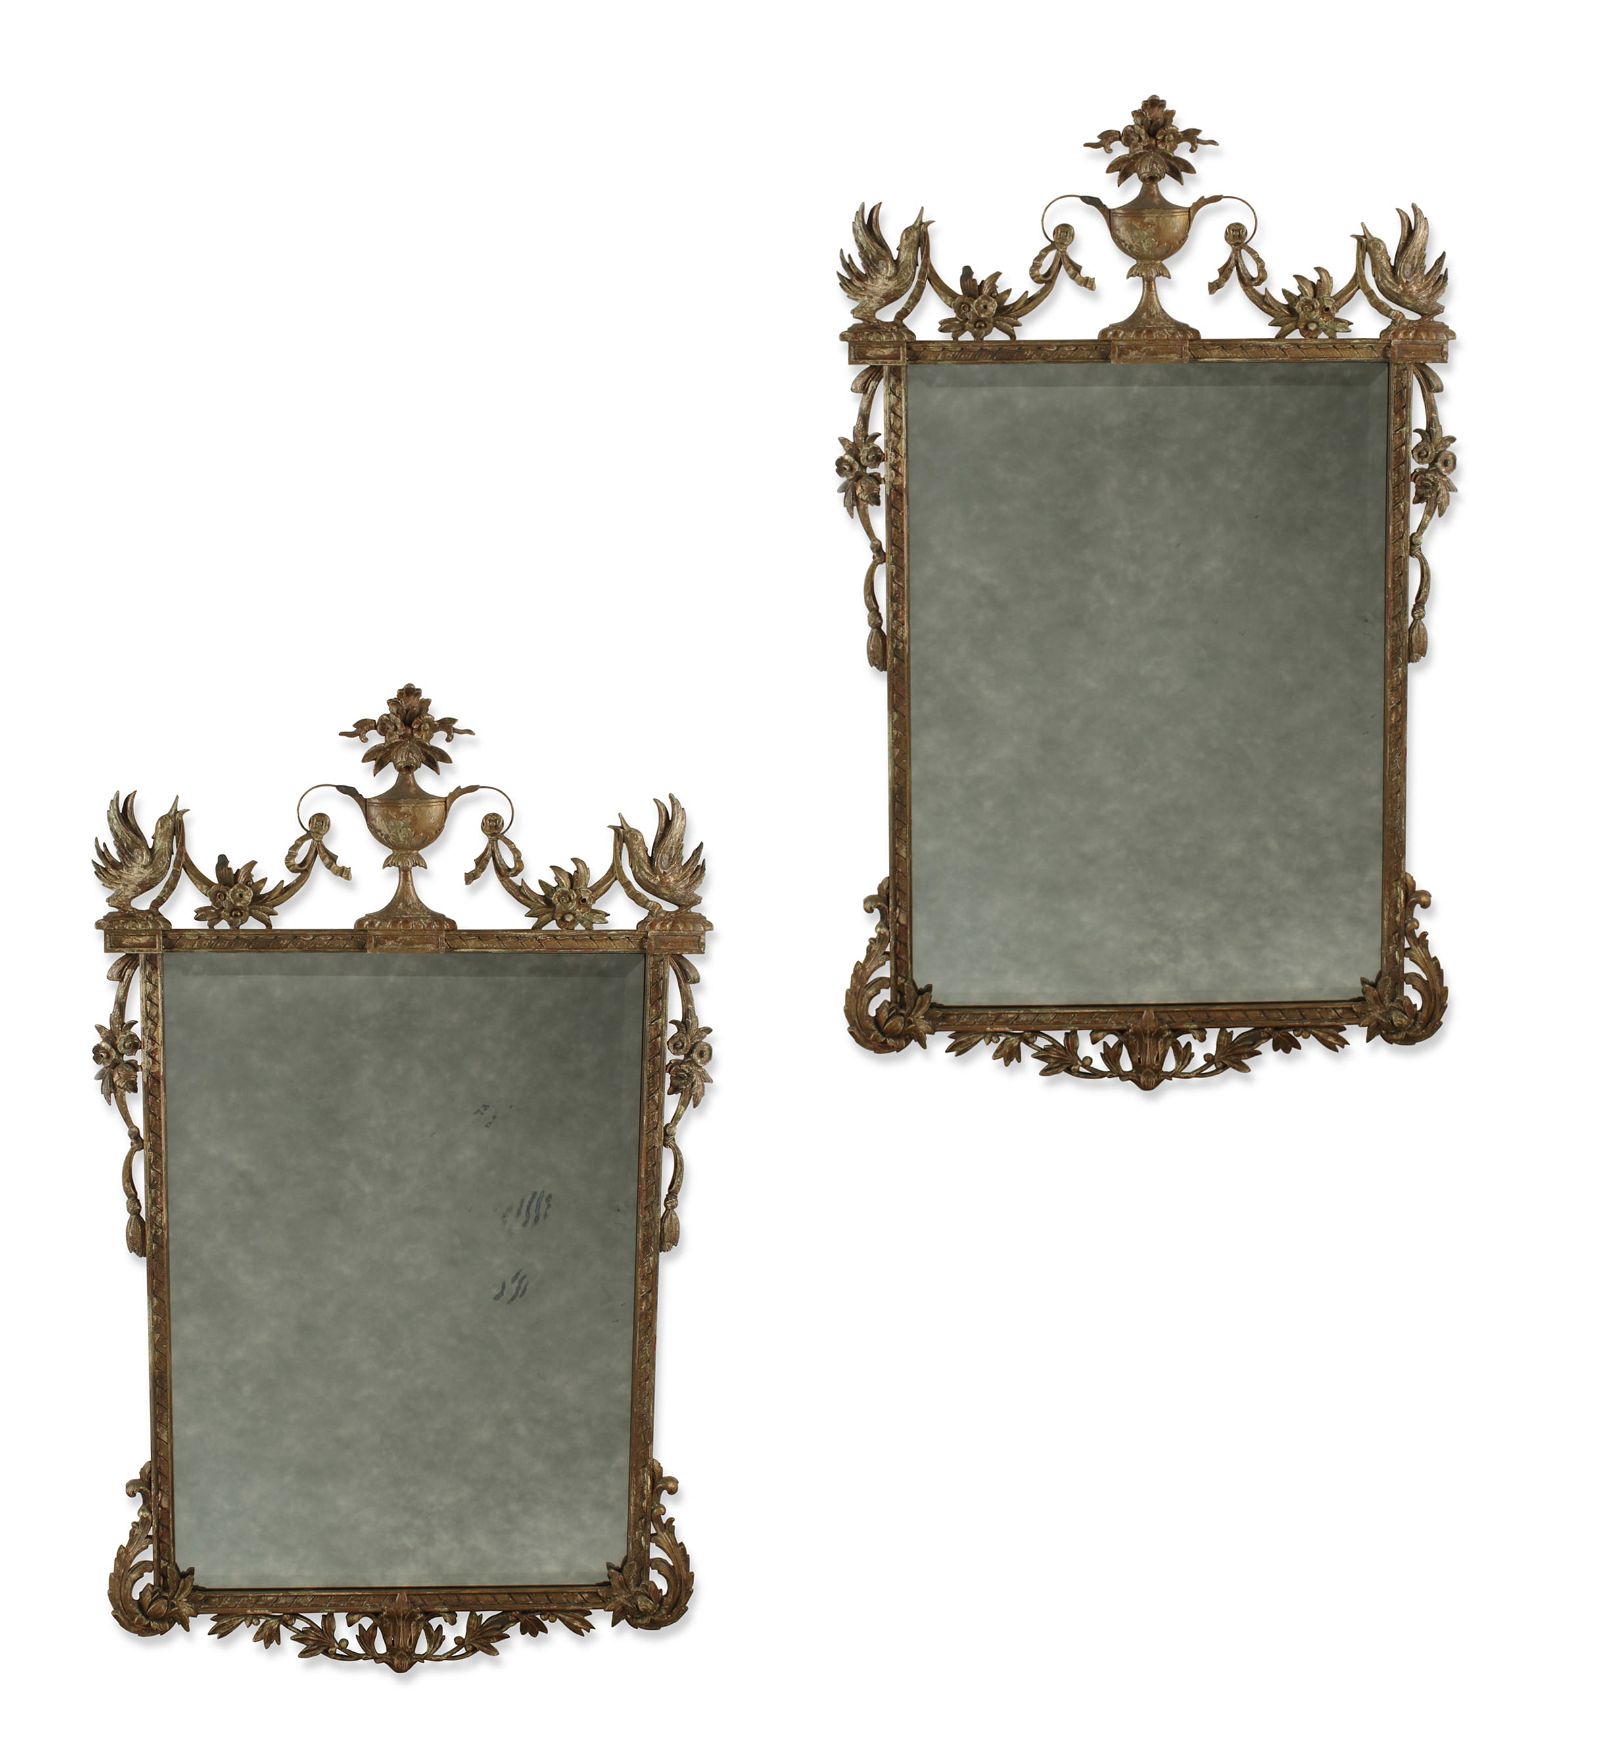 A PAIR OF NEOCLASSICAL STYLE GILTWOOD 2fb353e